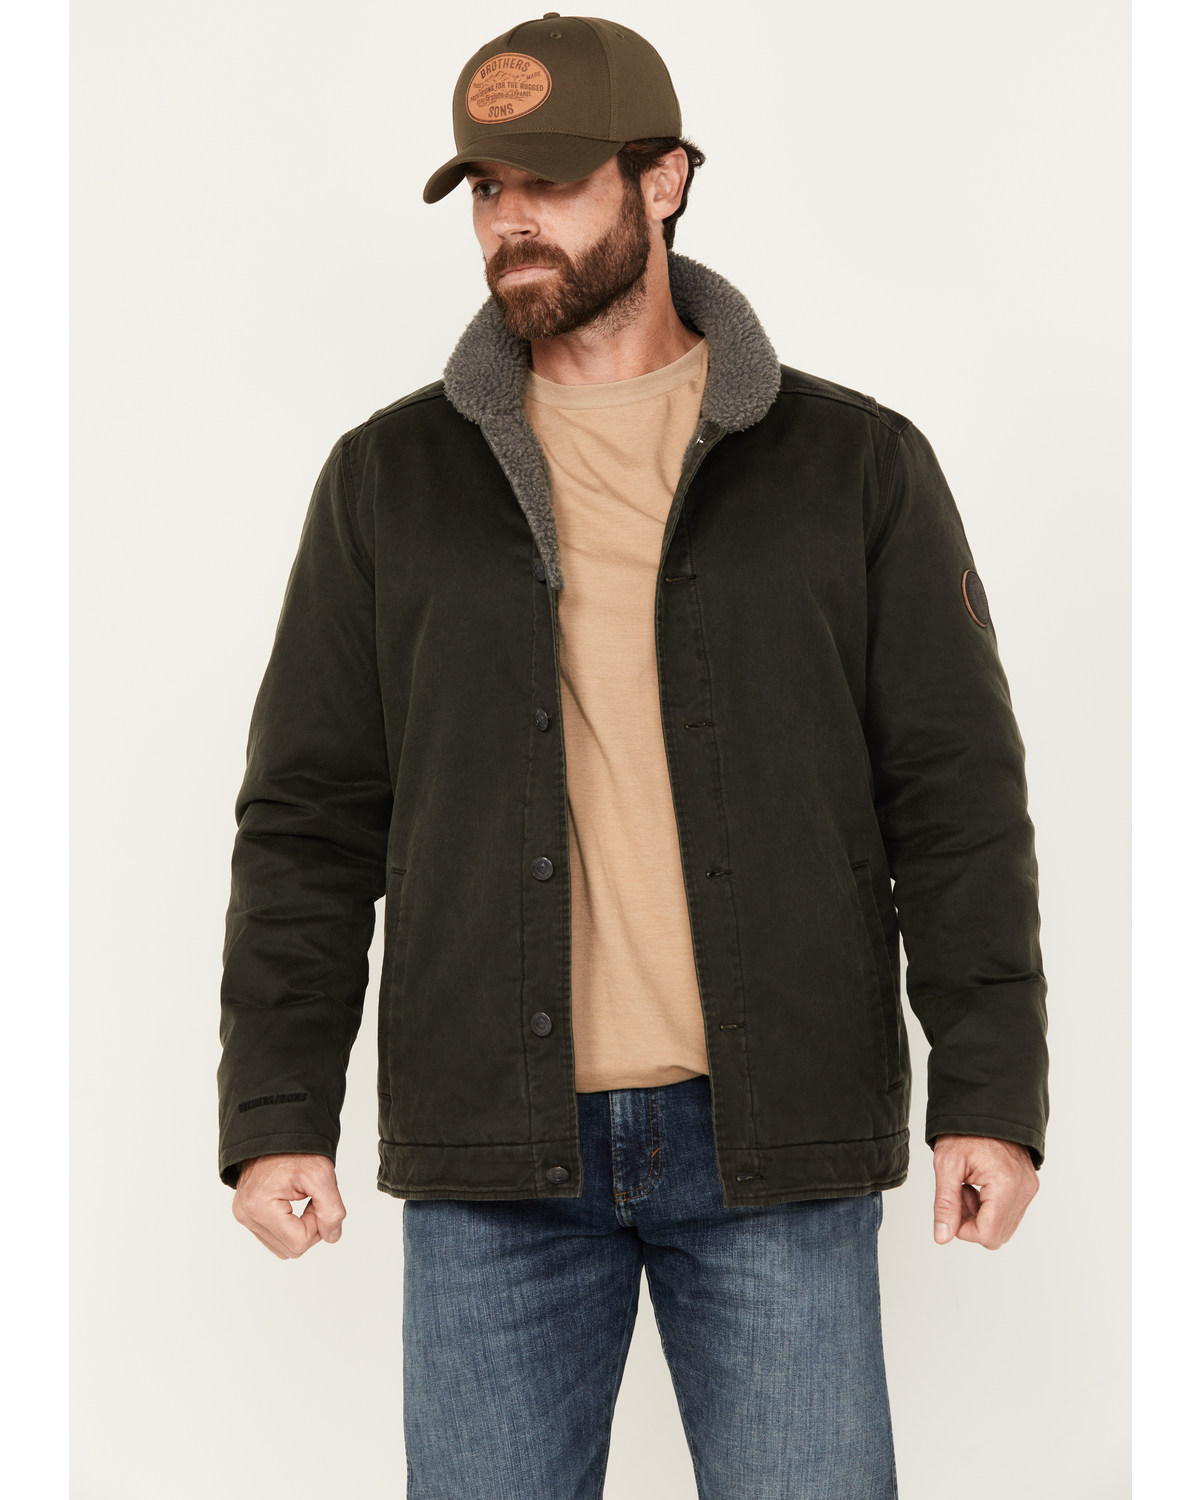 Brothers and Sons Men's Legacy Sherpa Lined Oil Button Down Jacket